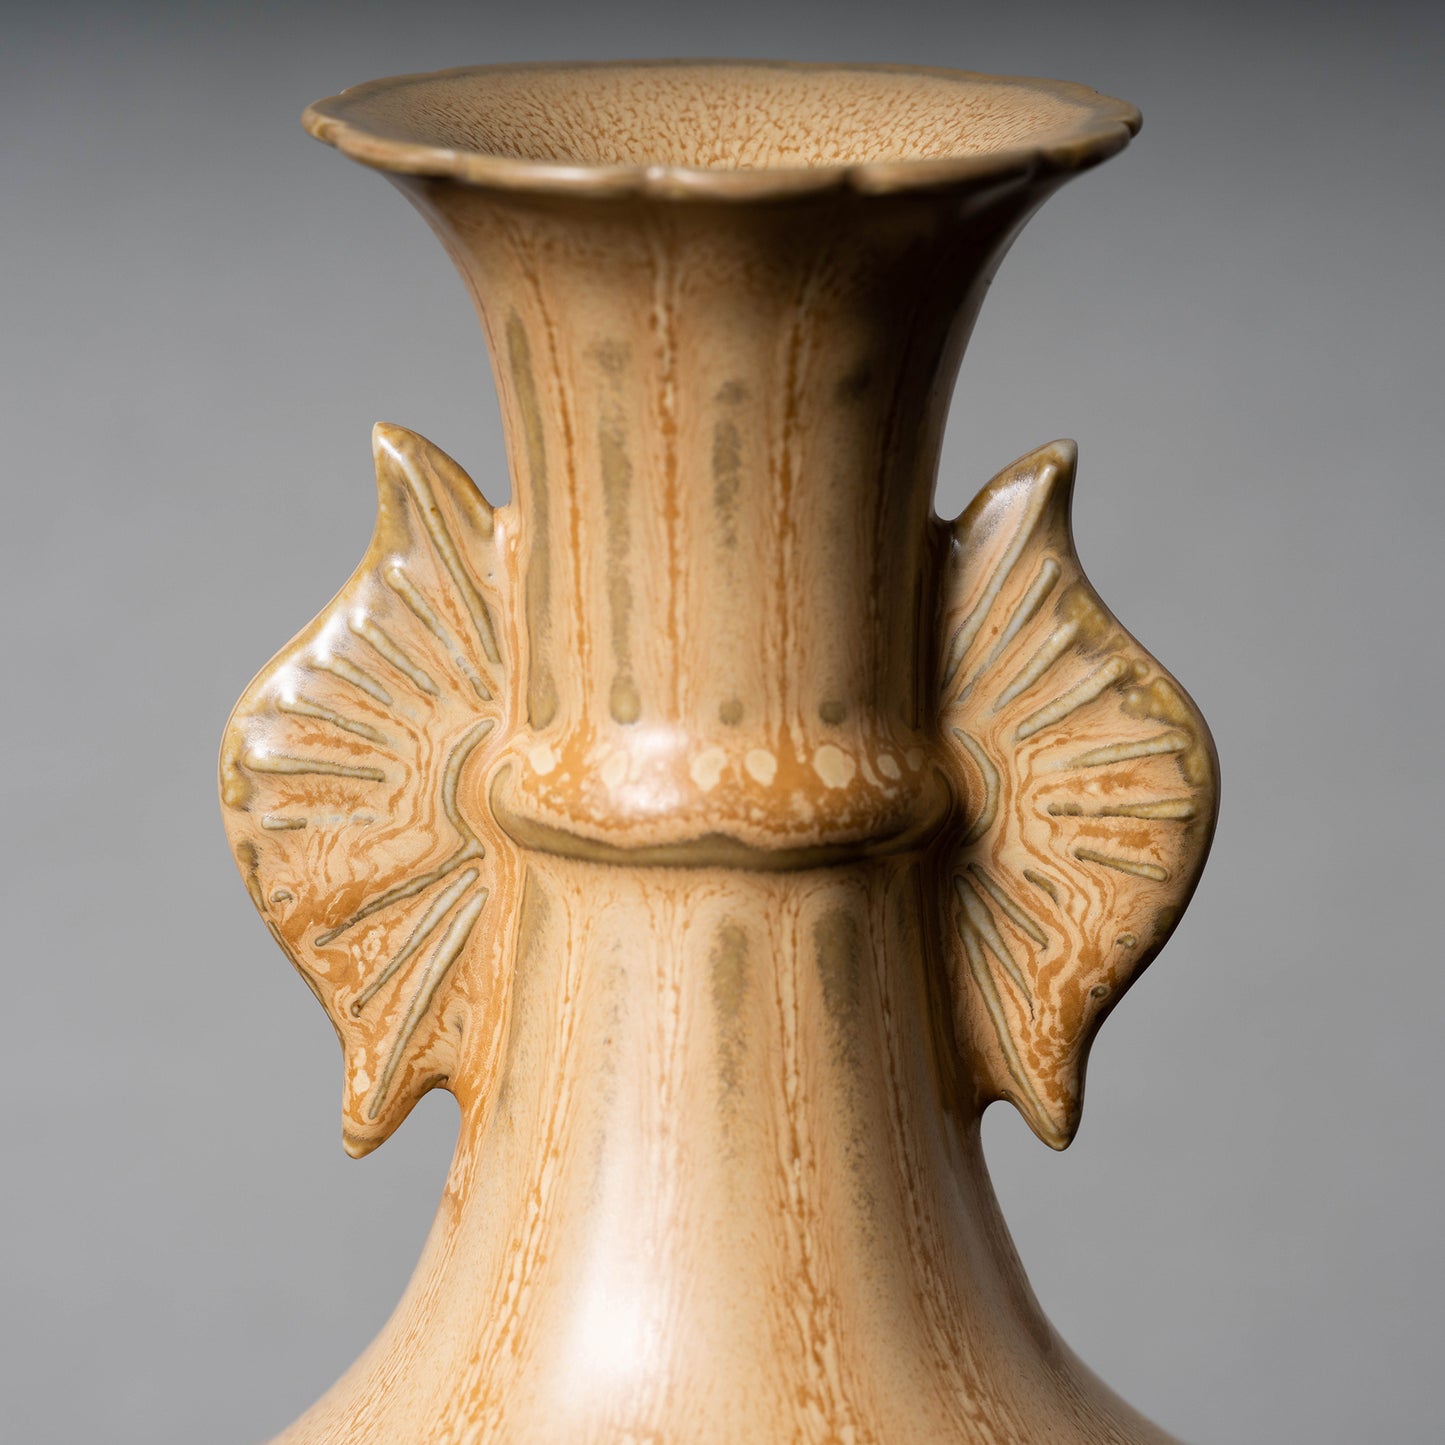 Southern Song Dynasty Yellow Glaze bottle with Two Handle